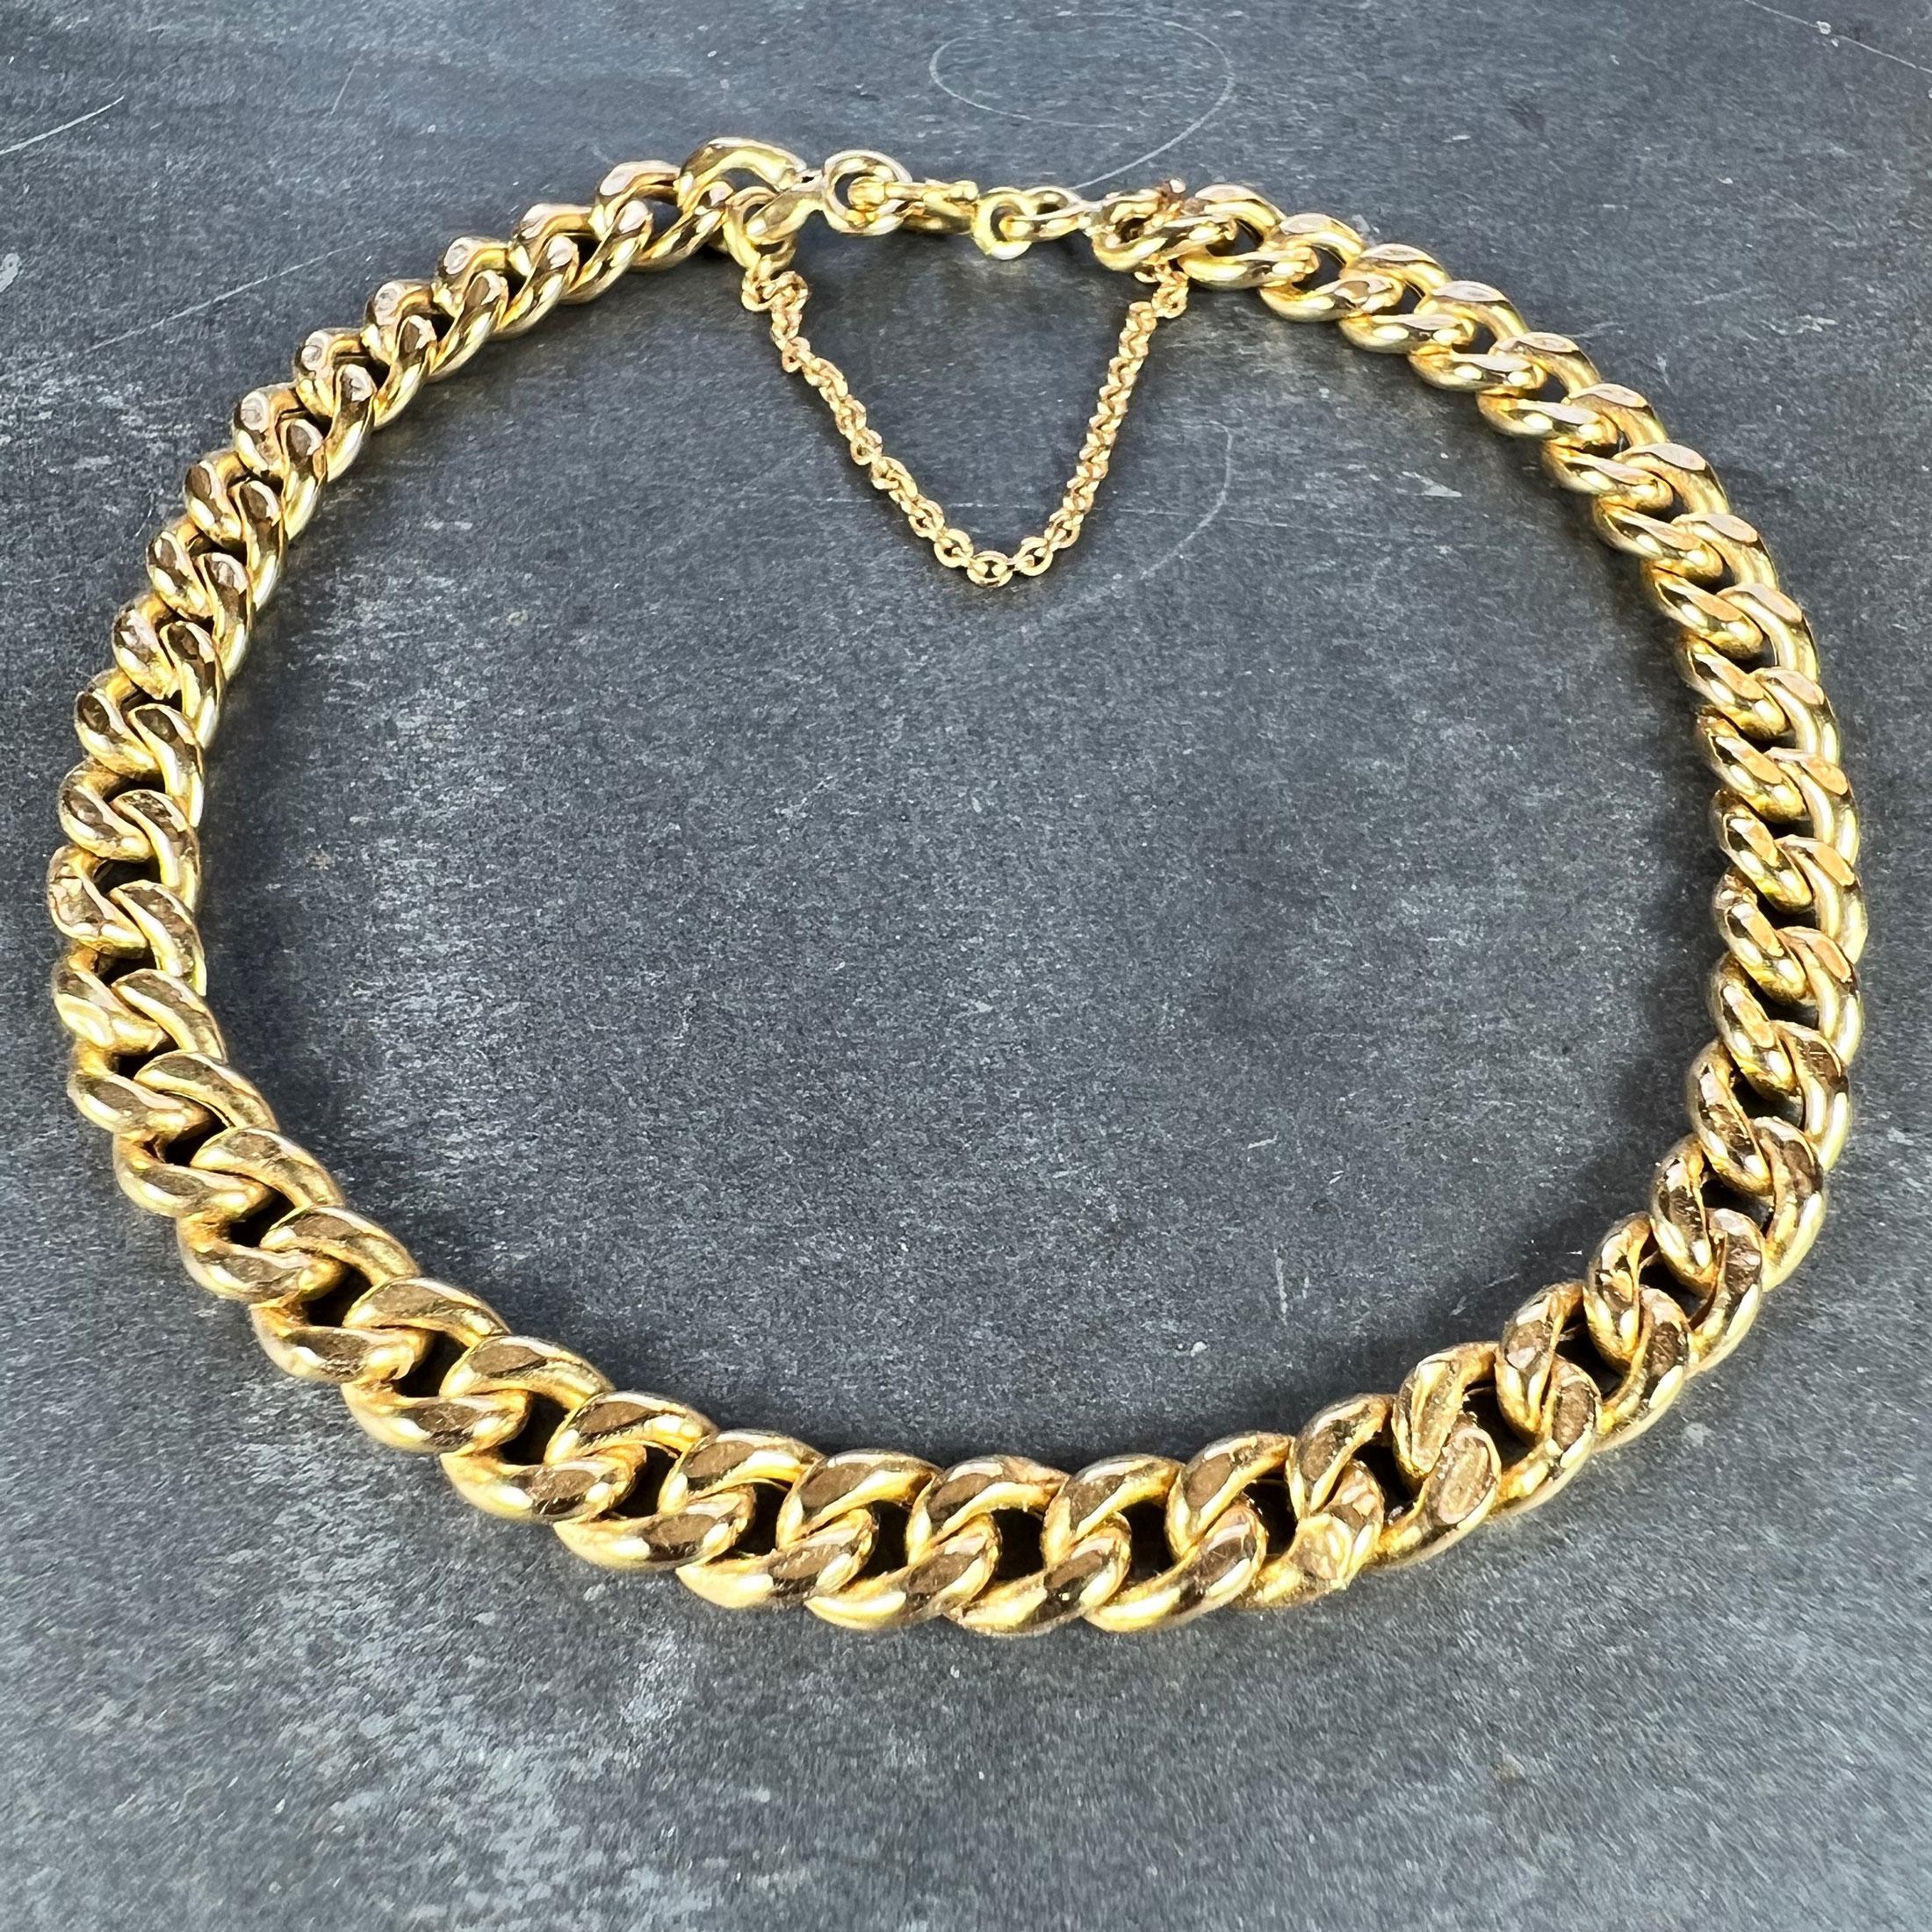 Vintage 18 Karat Yellow Gold Curb Link Chain Bracelet In Good Condition For Sale In London, GB